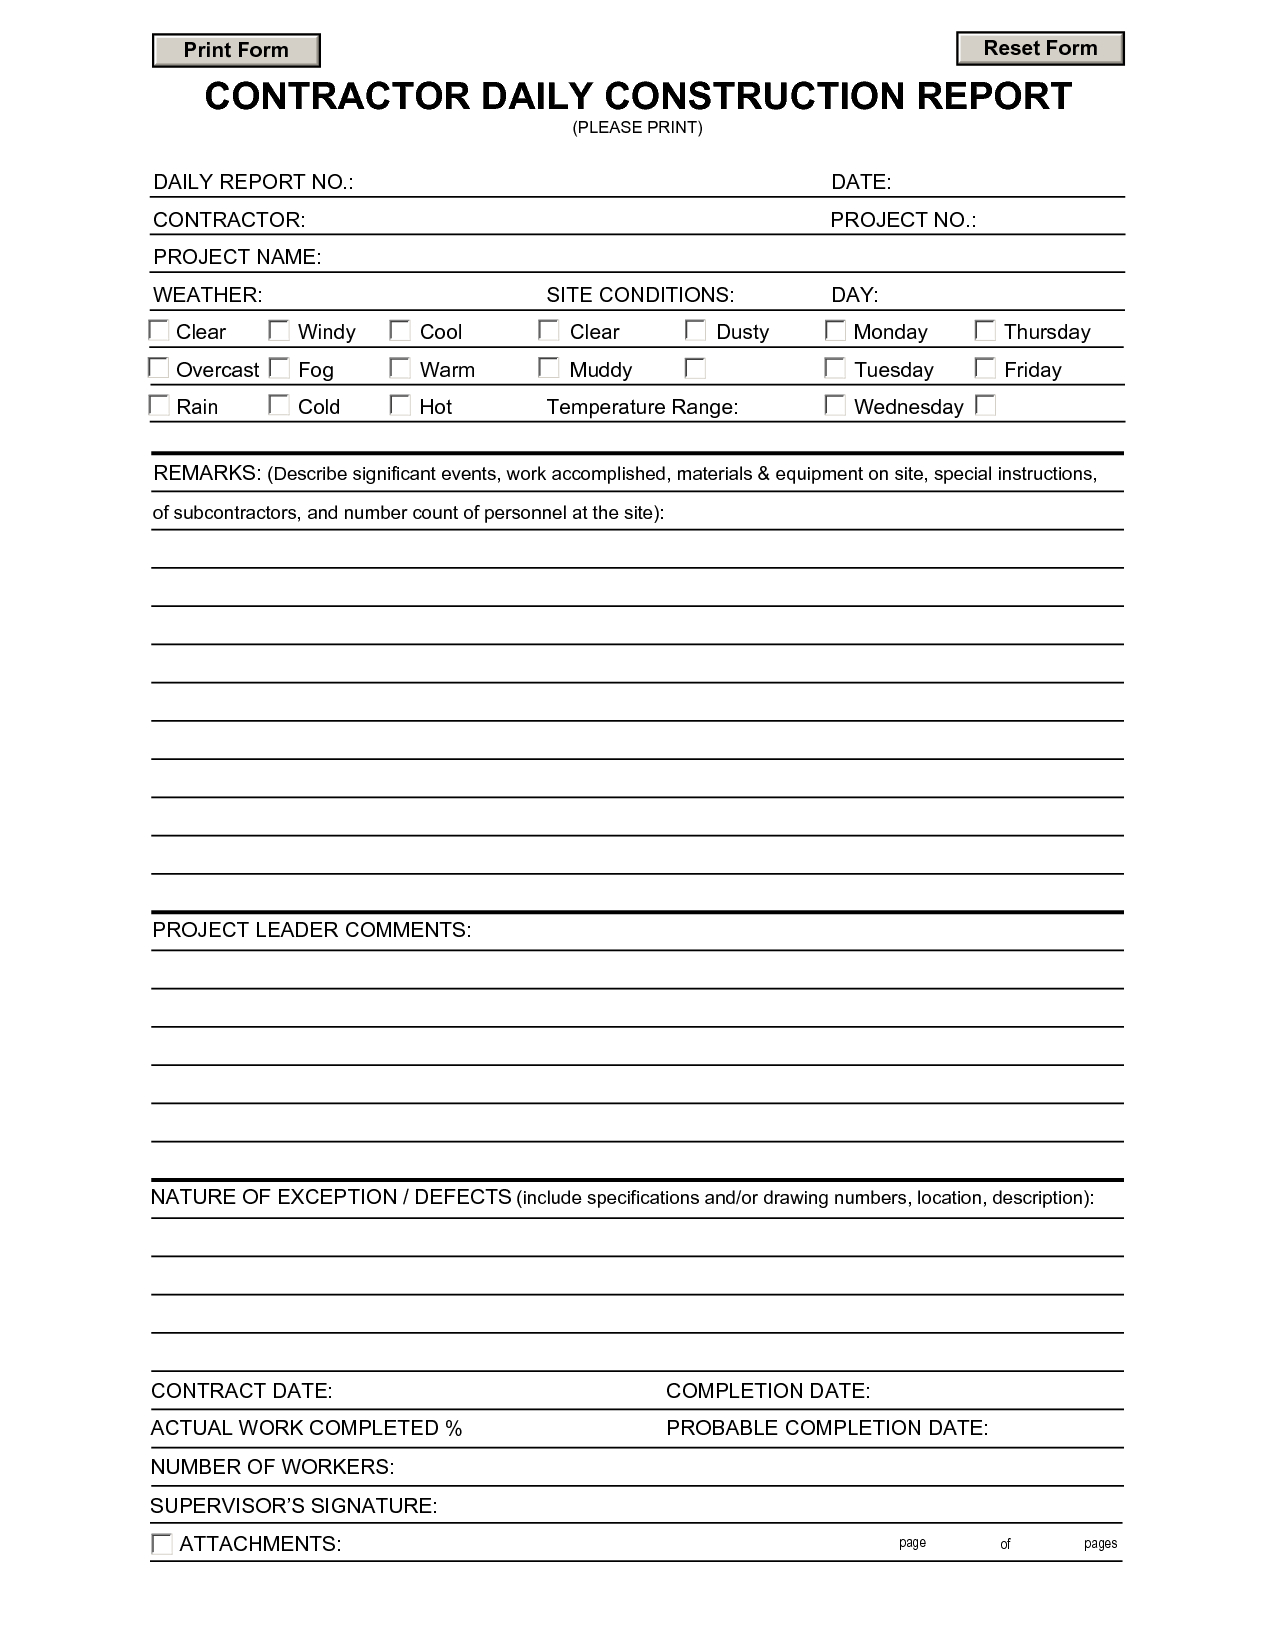 Construction Daily Report Template | Contractors | Report In Equipment Fault Report Template